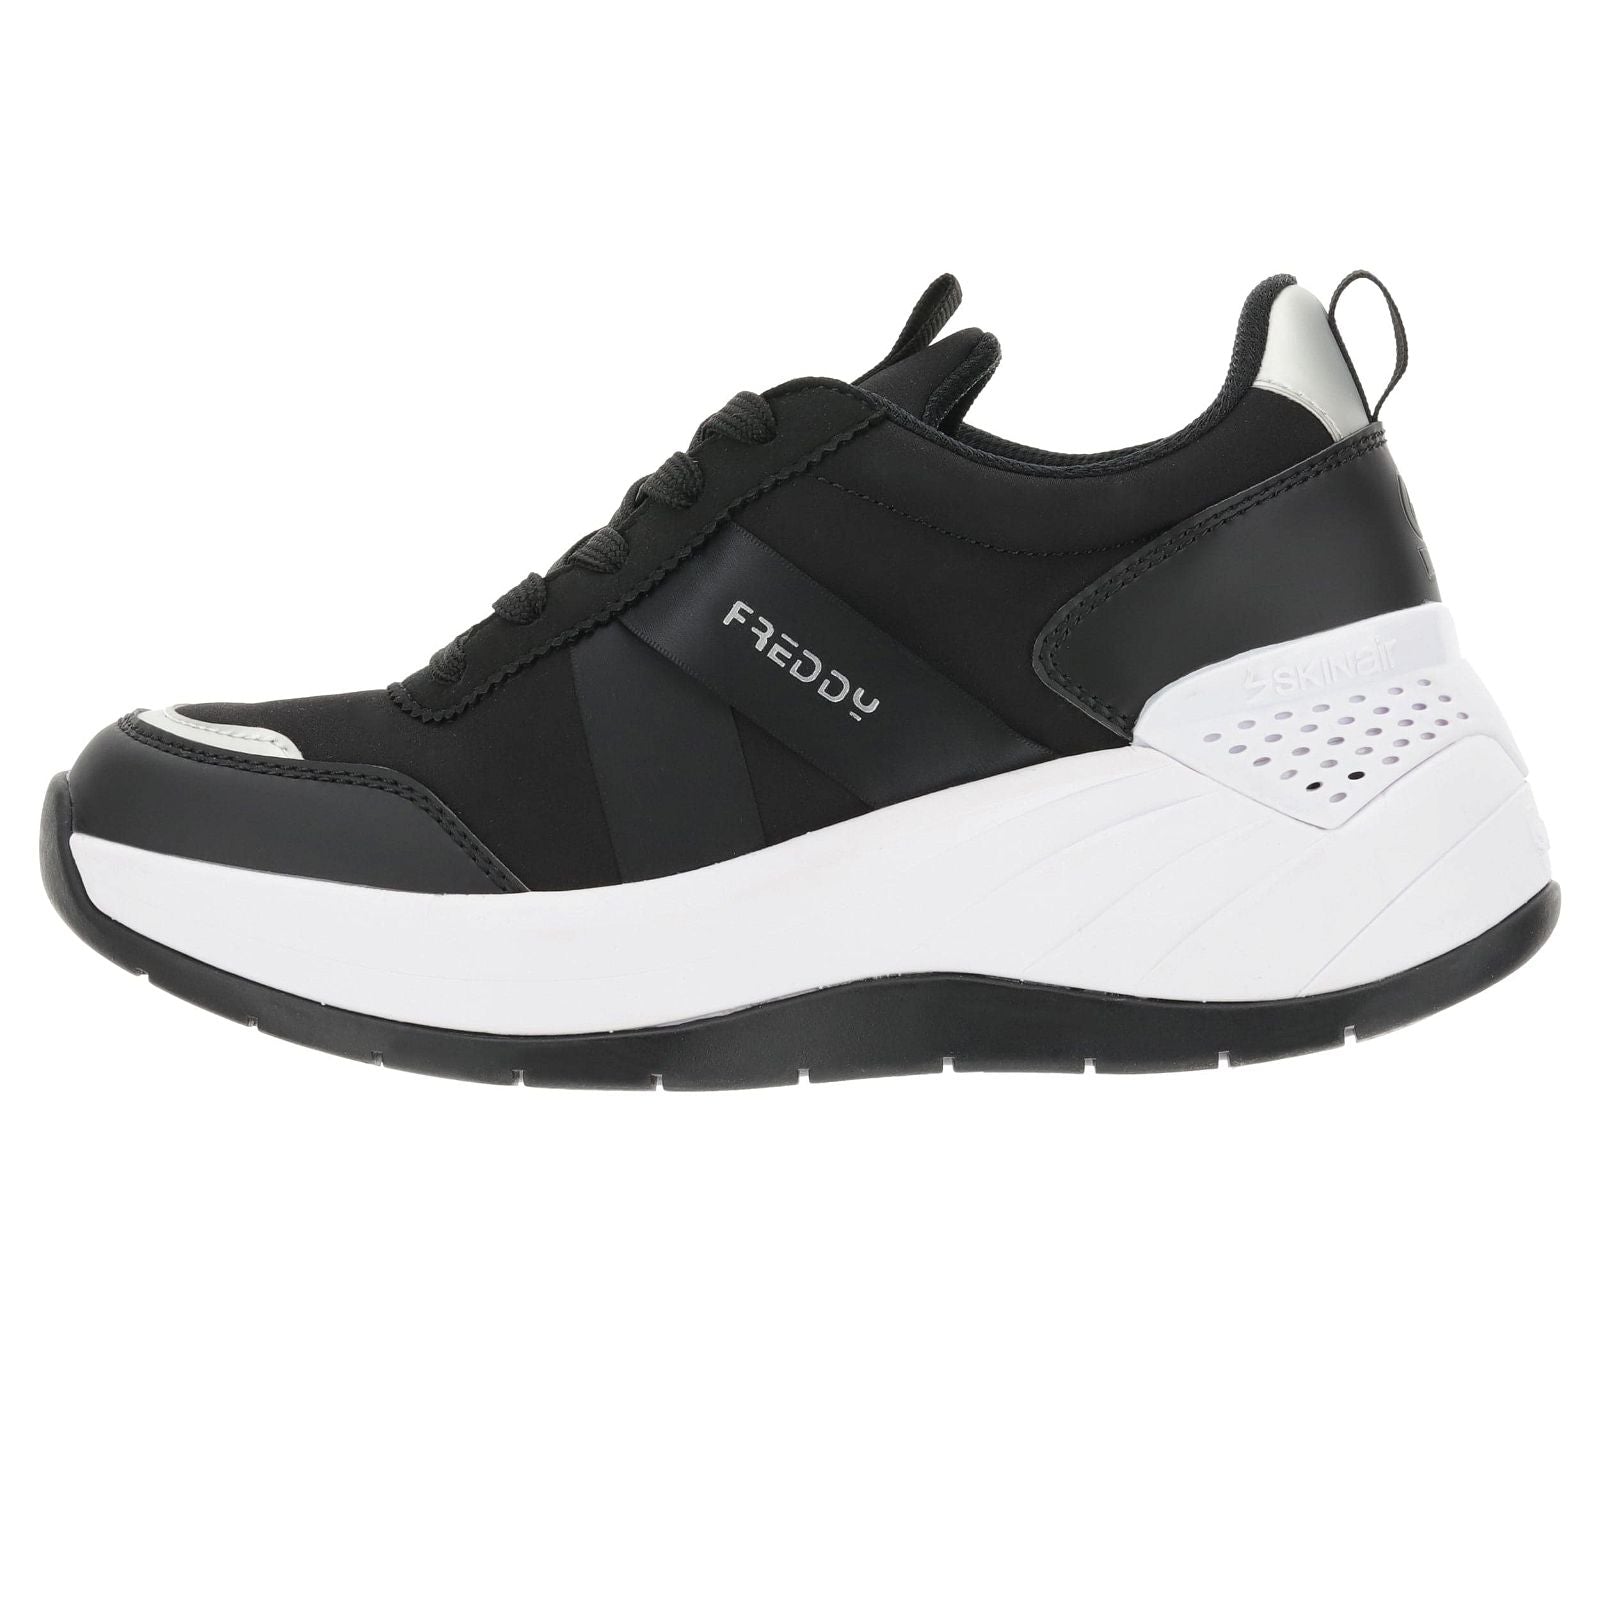 Women's Sneakers with Skinair® Technology - Black 2